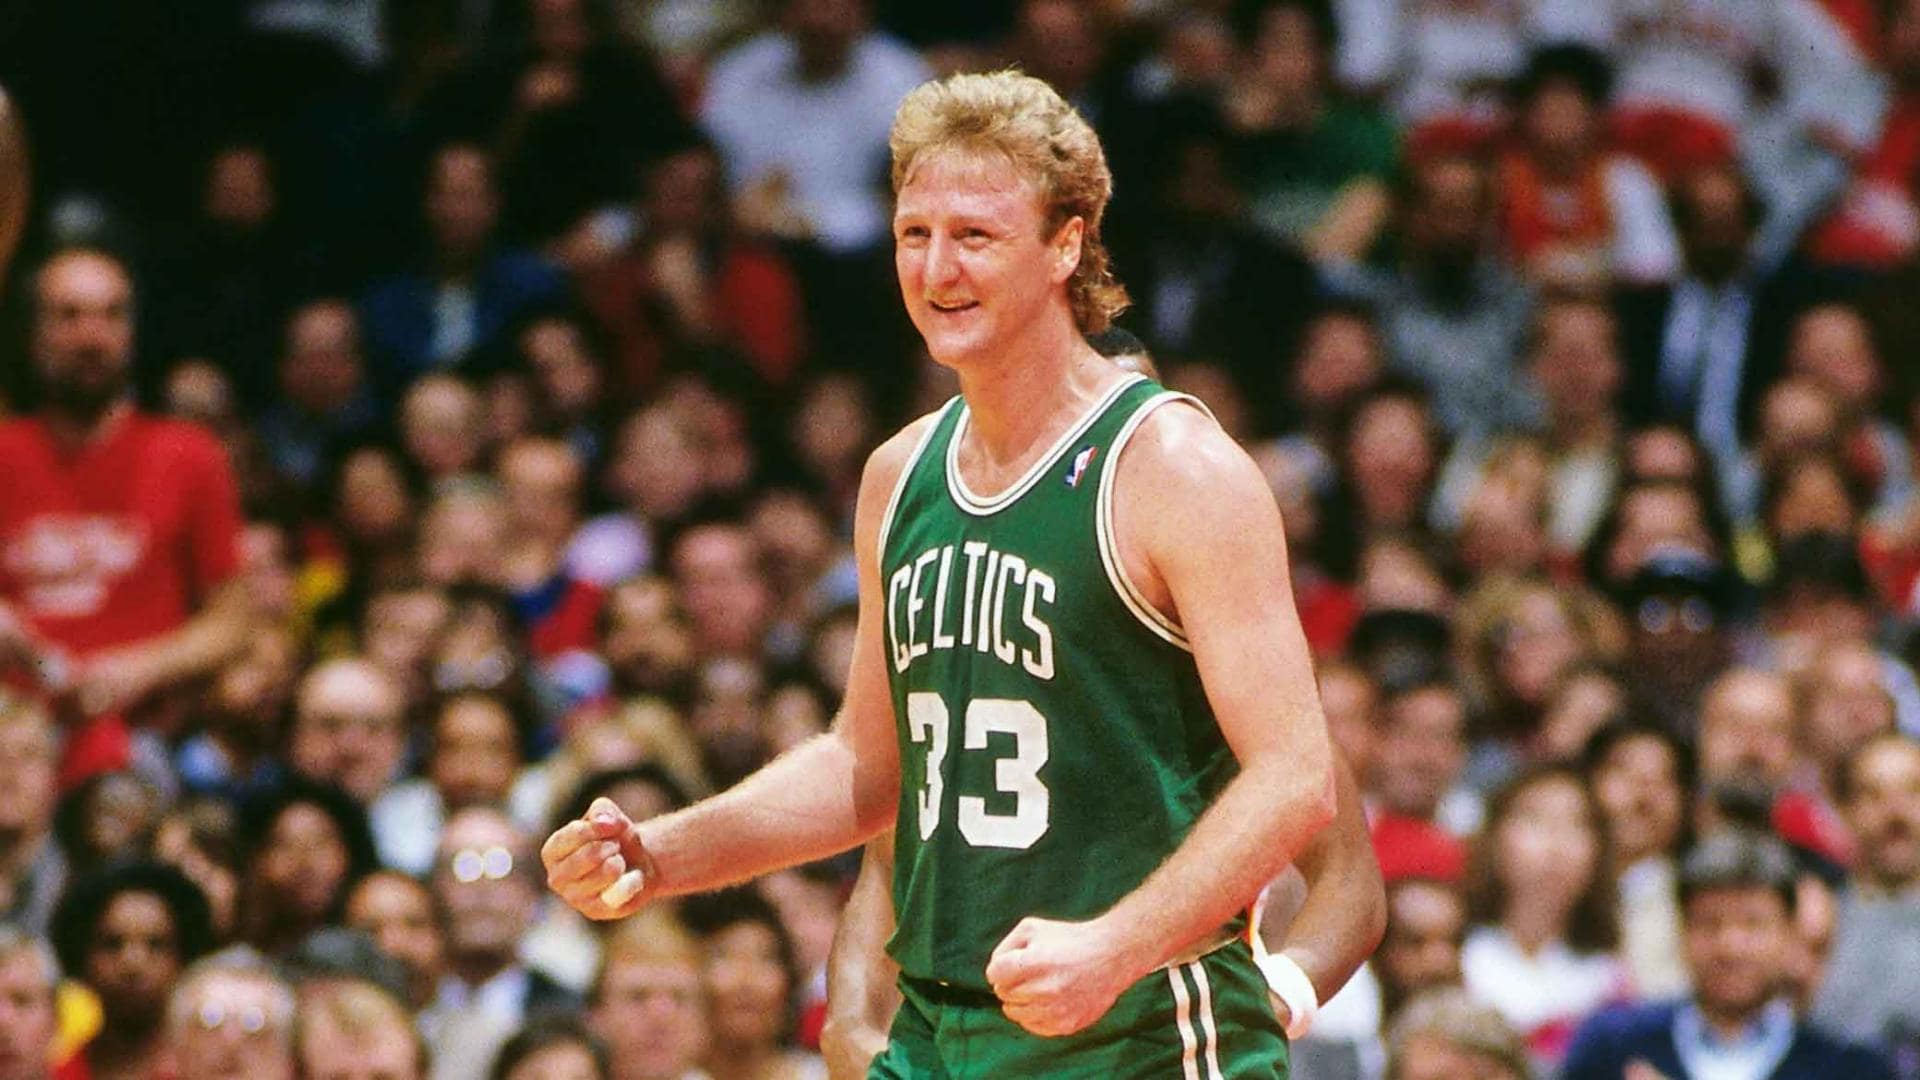 Is Larry Bird Gay? What Does He Have To Say About It?